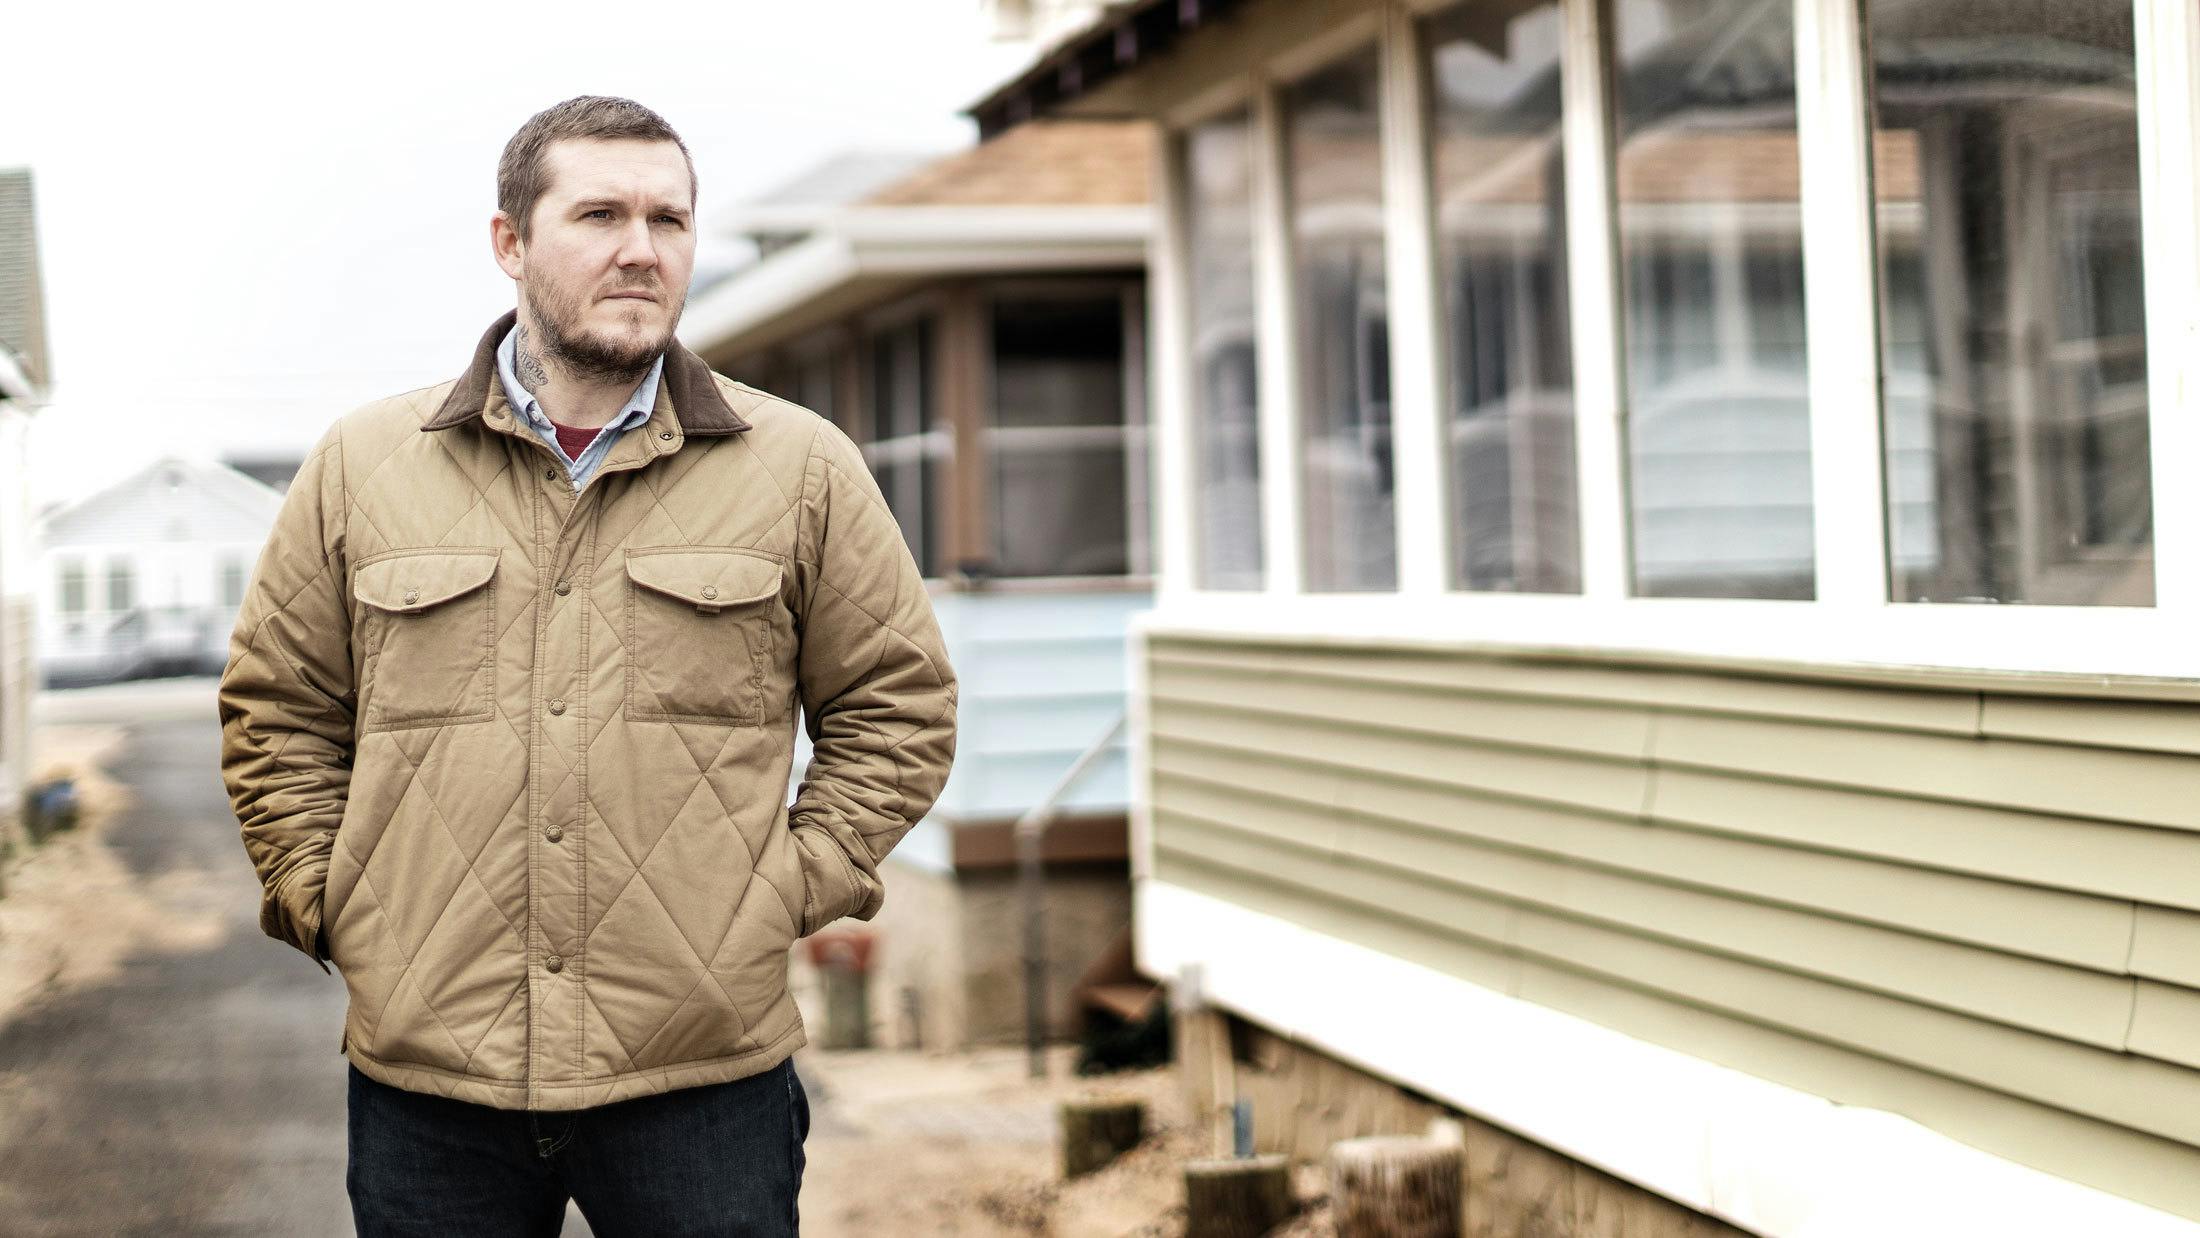 After years in the spotlight, Brian Fallon is finally comfortable